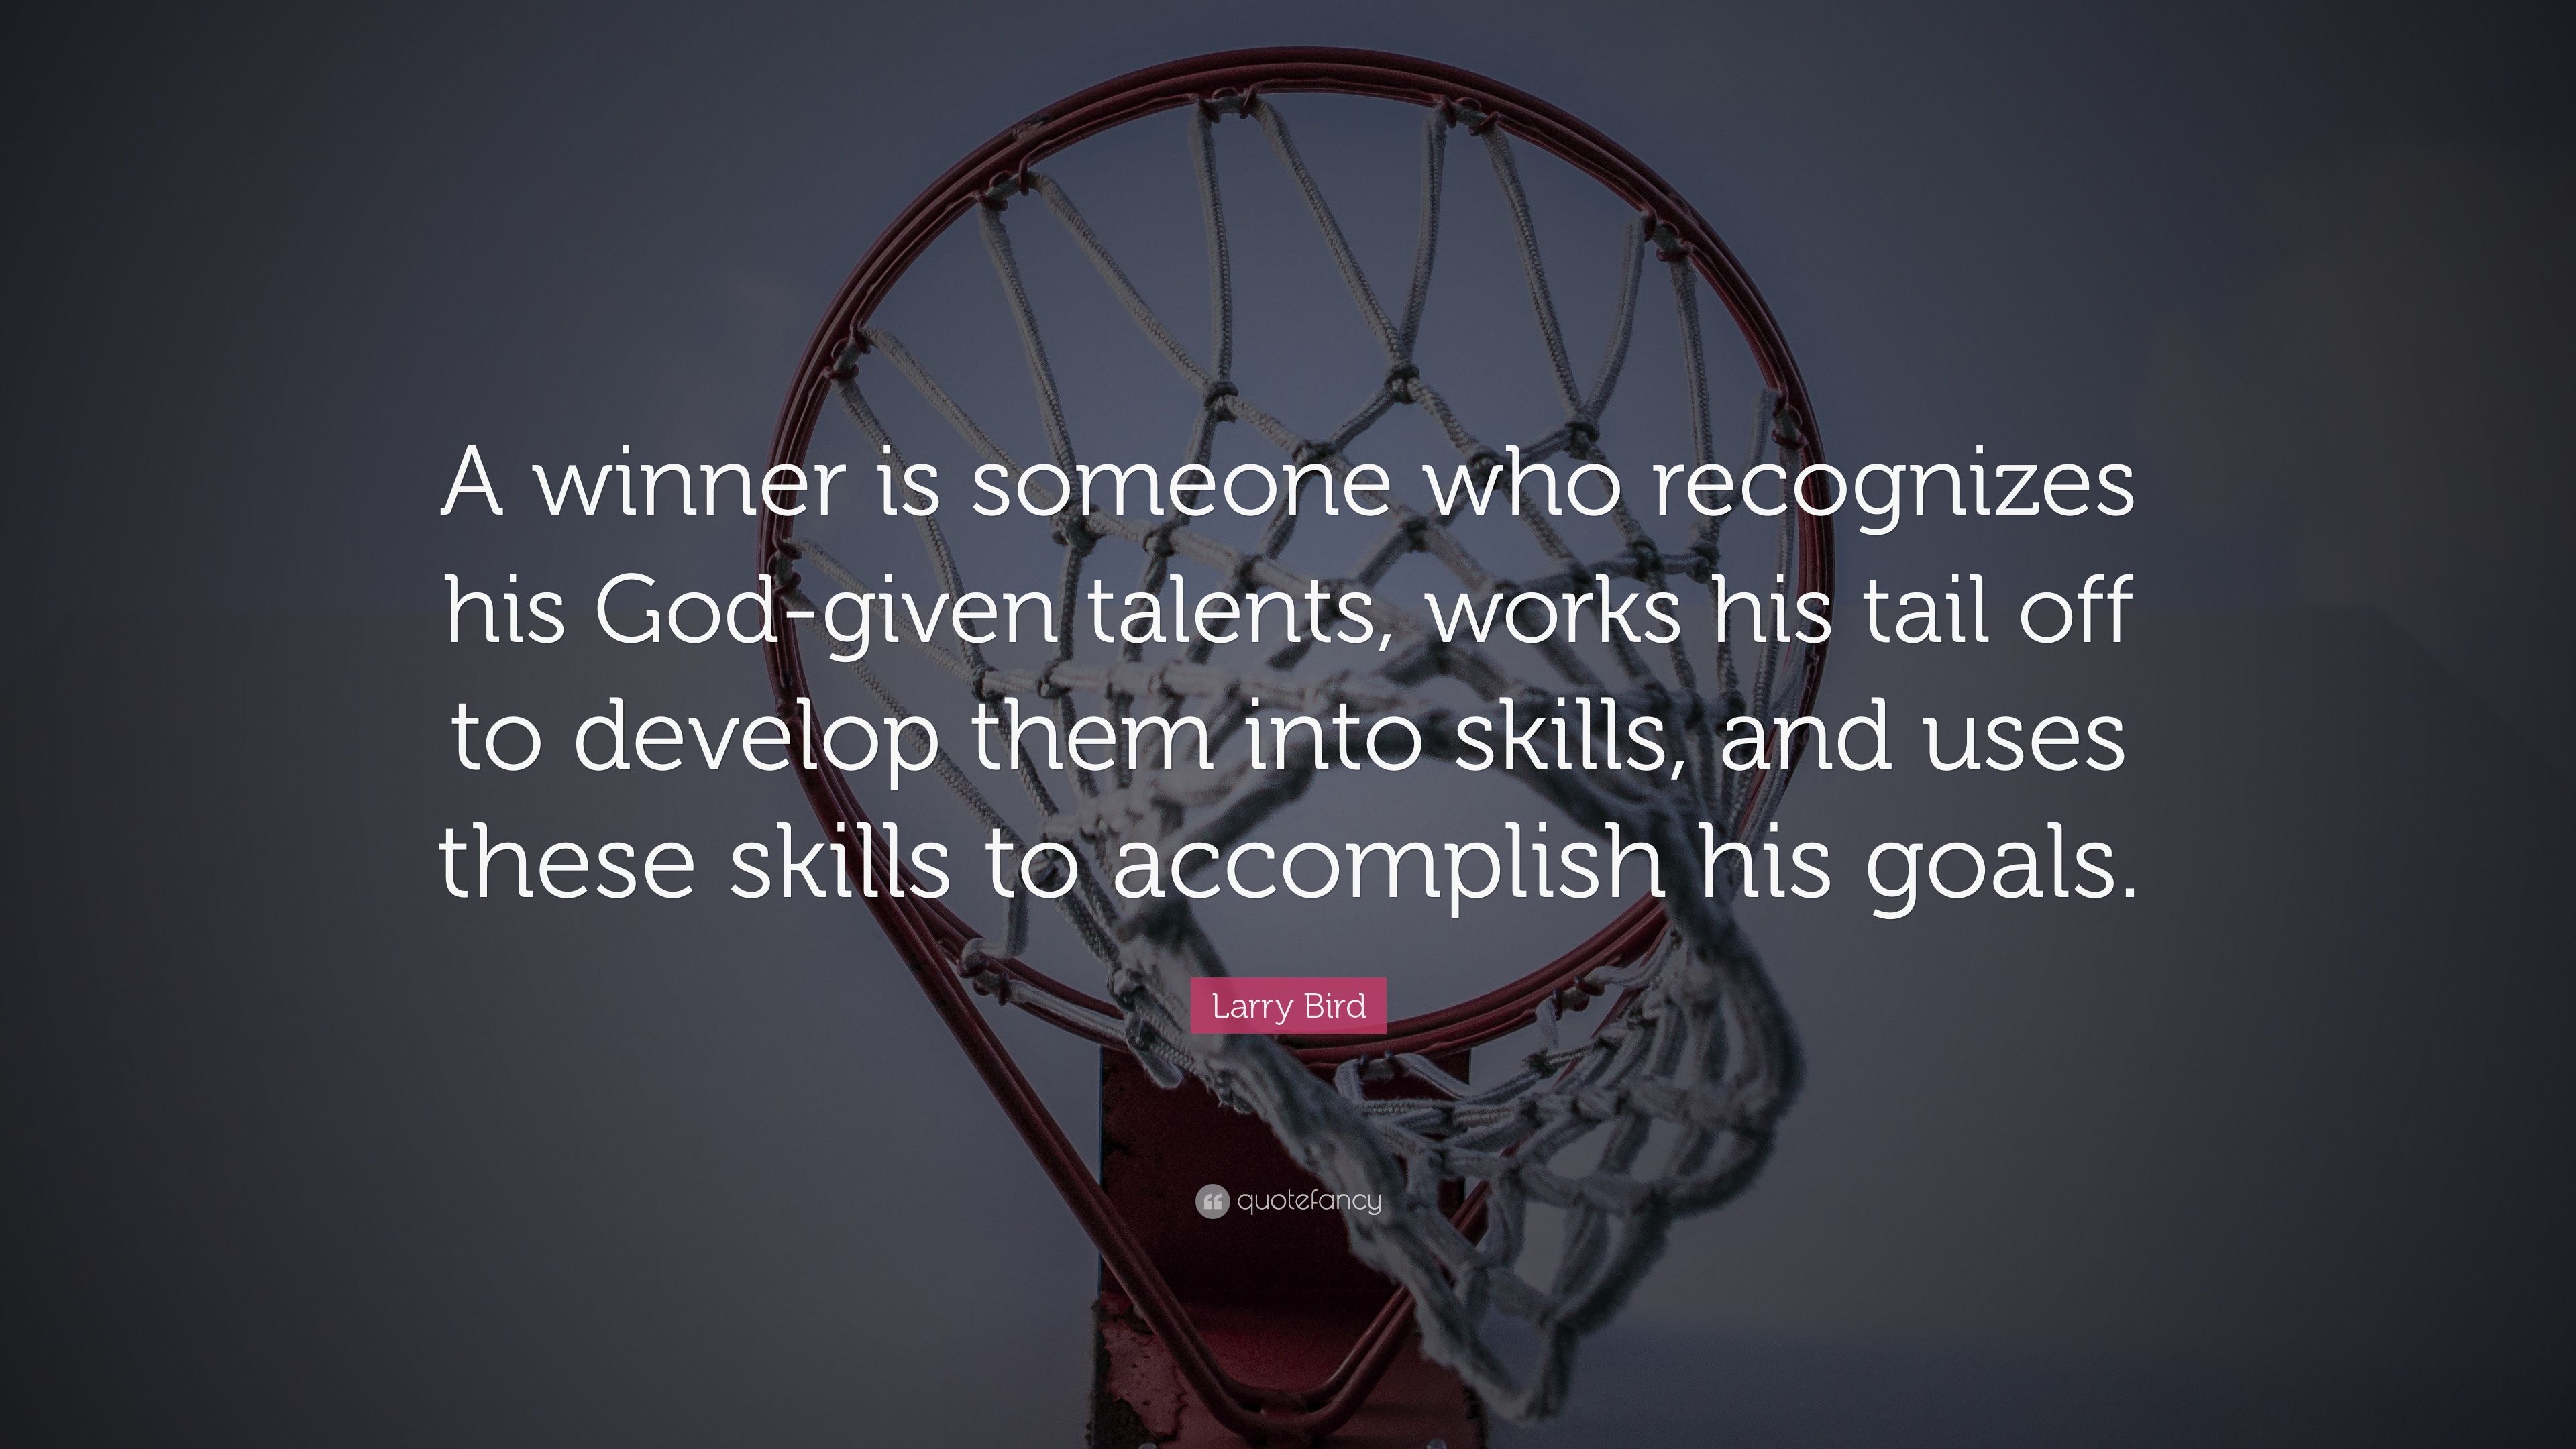 Basketball quotes about work Motivational nba basketball quotes with picture and image jerry